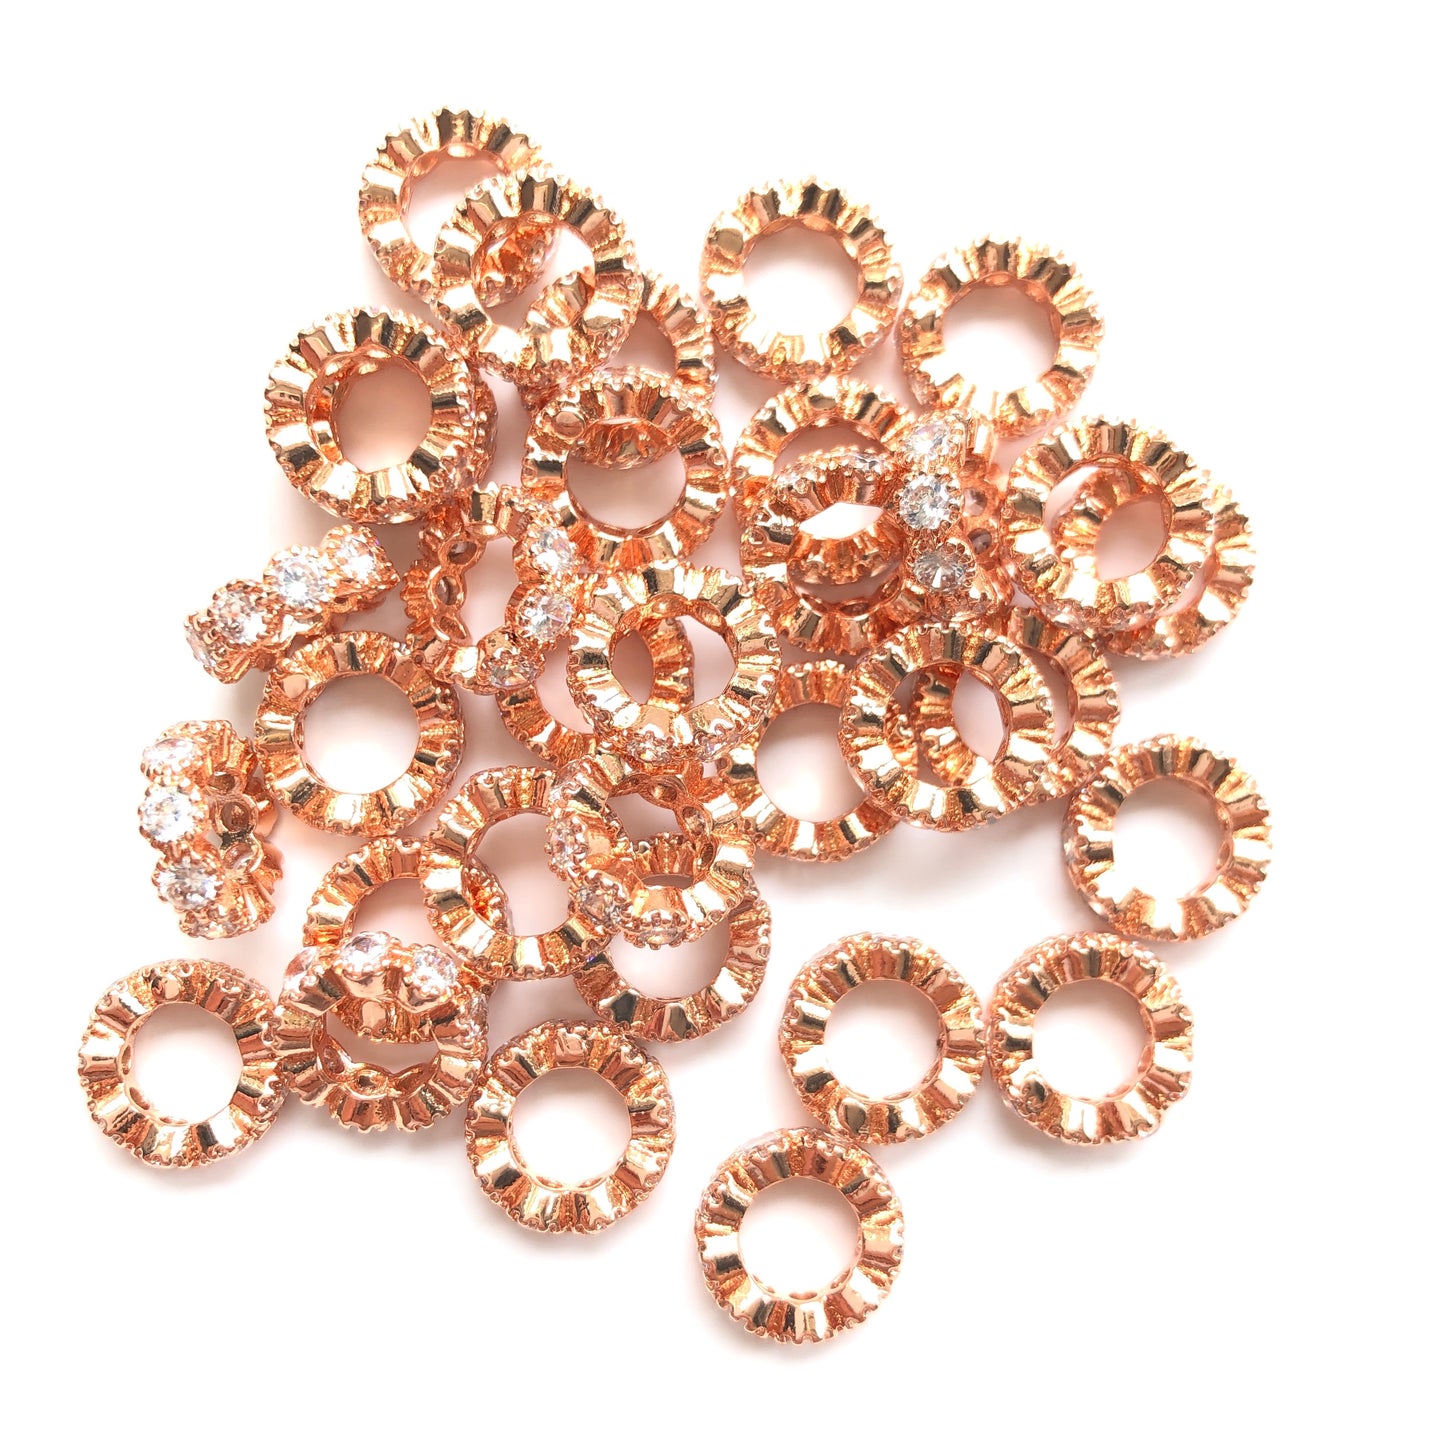 20pcs/lot 8/10mm Big Hole CZ Pave Wheel Rondelle Spacers Rose Gold CZ Paved Spacers New Spacers Arrivals Rondelle Beads Charms Beads Beyond